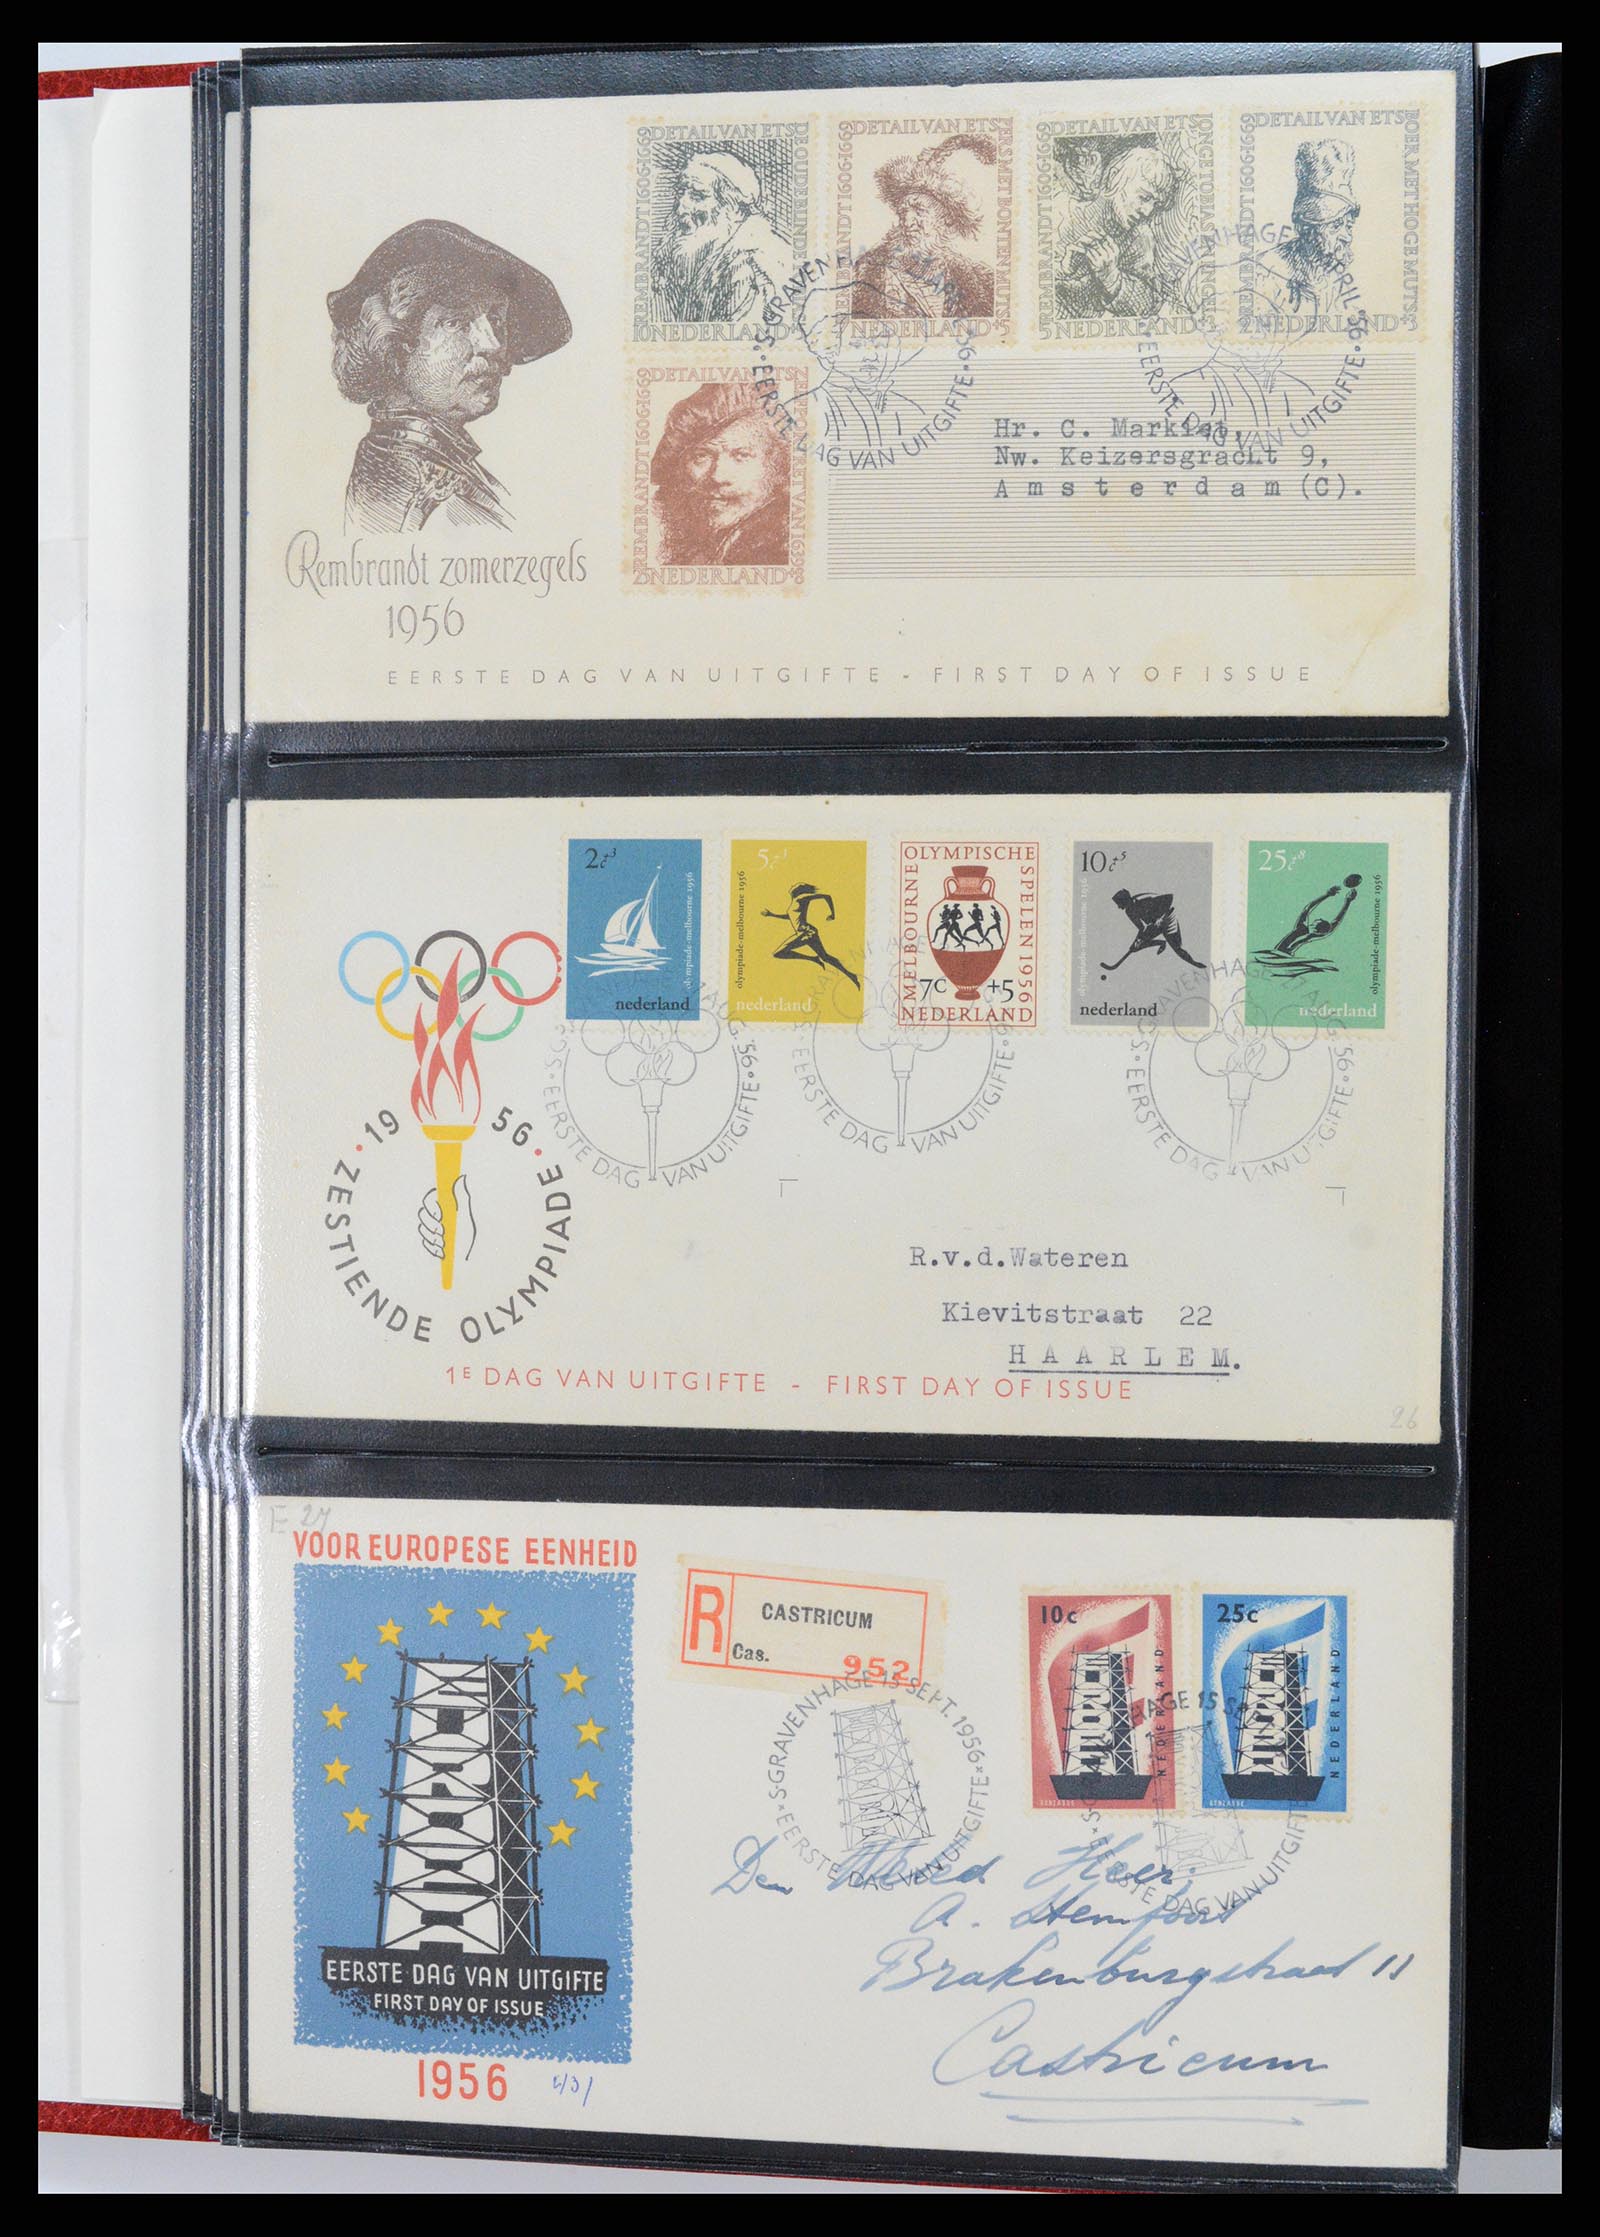 37484 011 - Stamp collection 37484 Netherlands FDC's 1950-1976.